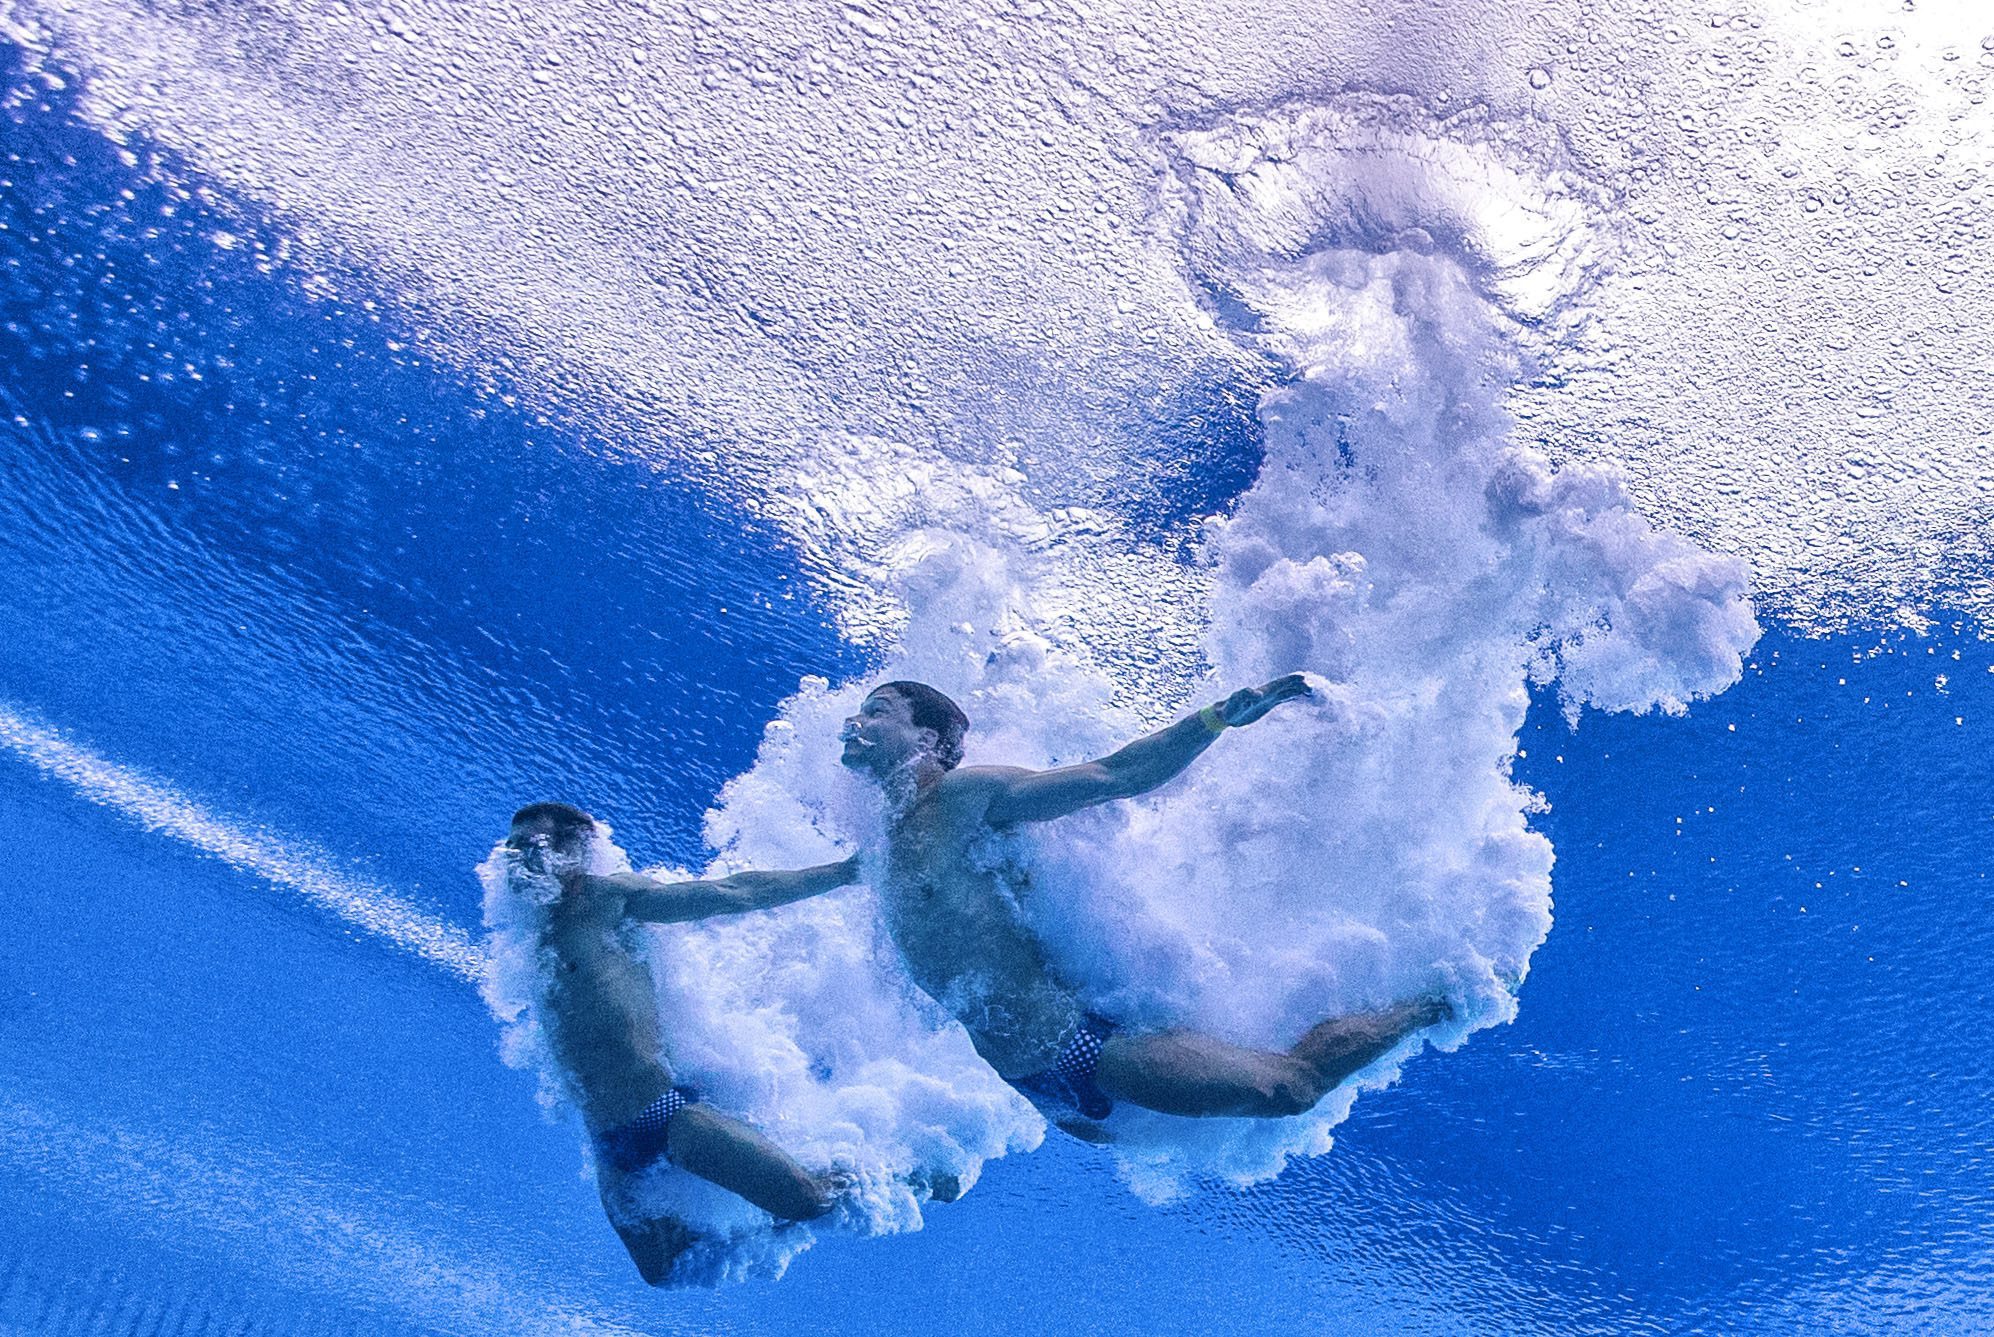 Sascha Klein and Patrick Hausding of Germany perform during the Men's 10-metre synchro platform diving final at the 15th FINA swimming world championships in Spain in 2013. Photo: EPA